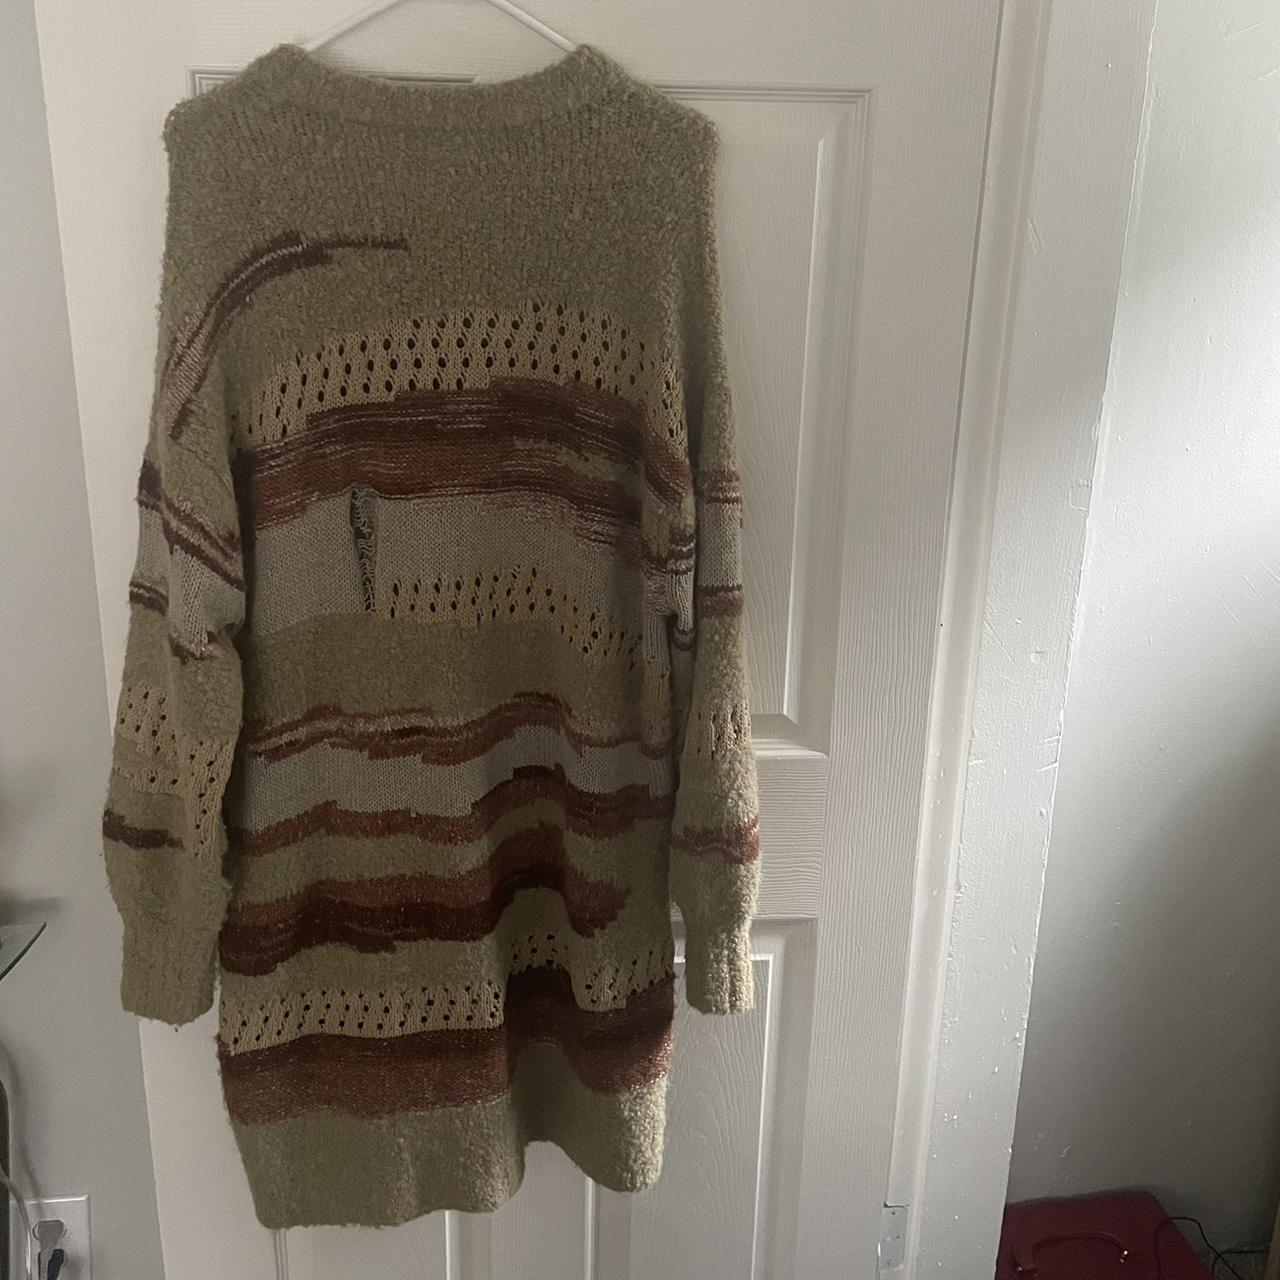 RARE Distressed Urban Outfitters sweater dress! This... - Depop